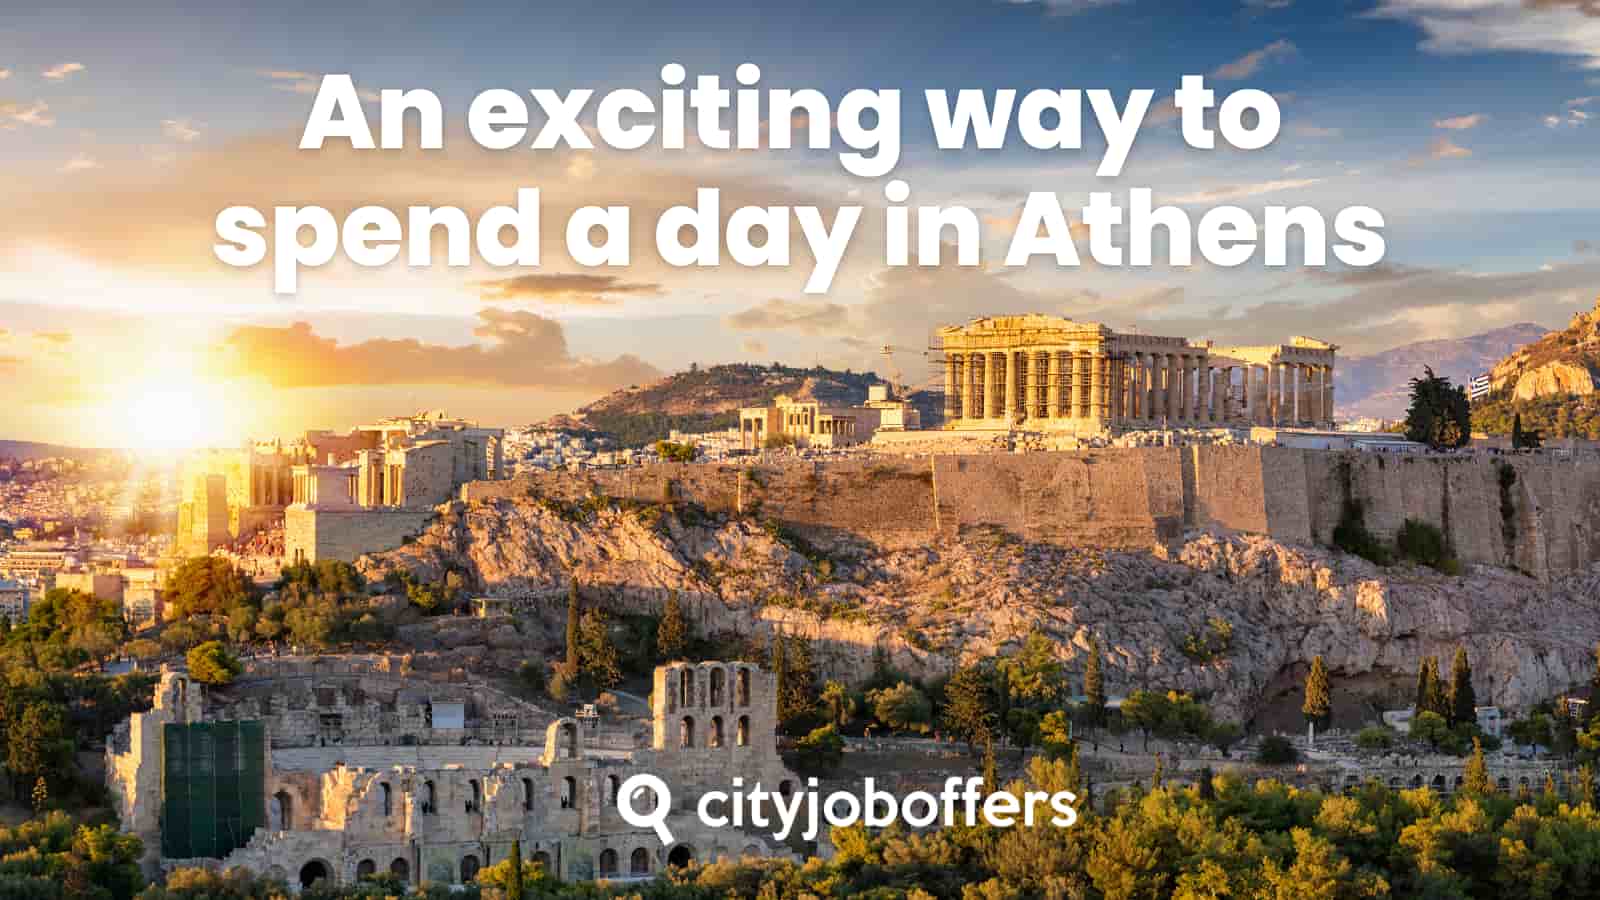 An exciting way to spend a day in Athens